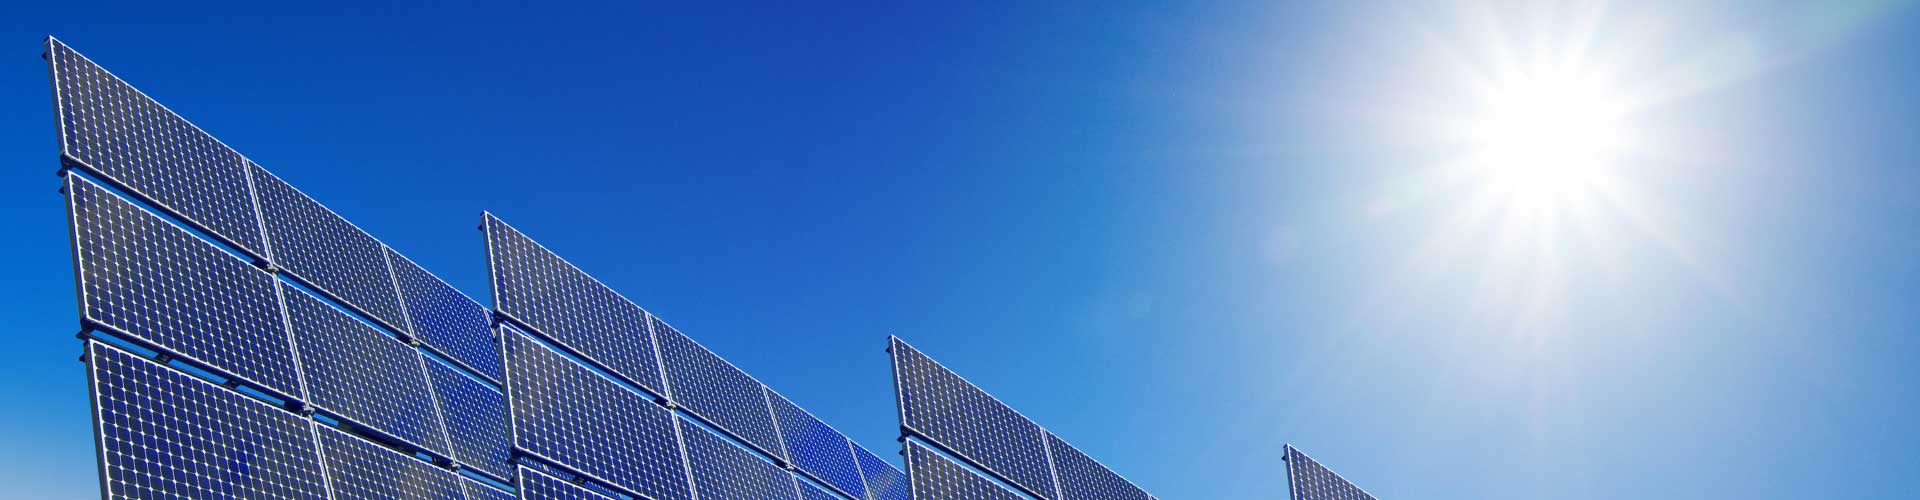 A row of solar panels in full sunlight under blue skies that are supported by OTTHydroMet’s solar instruments.